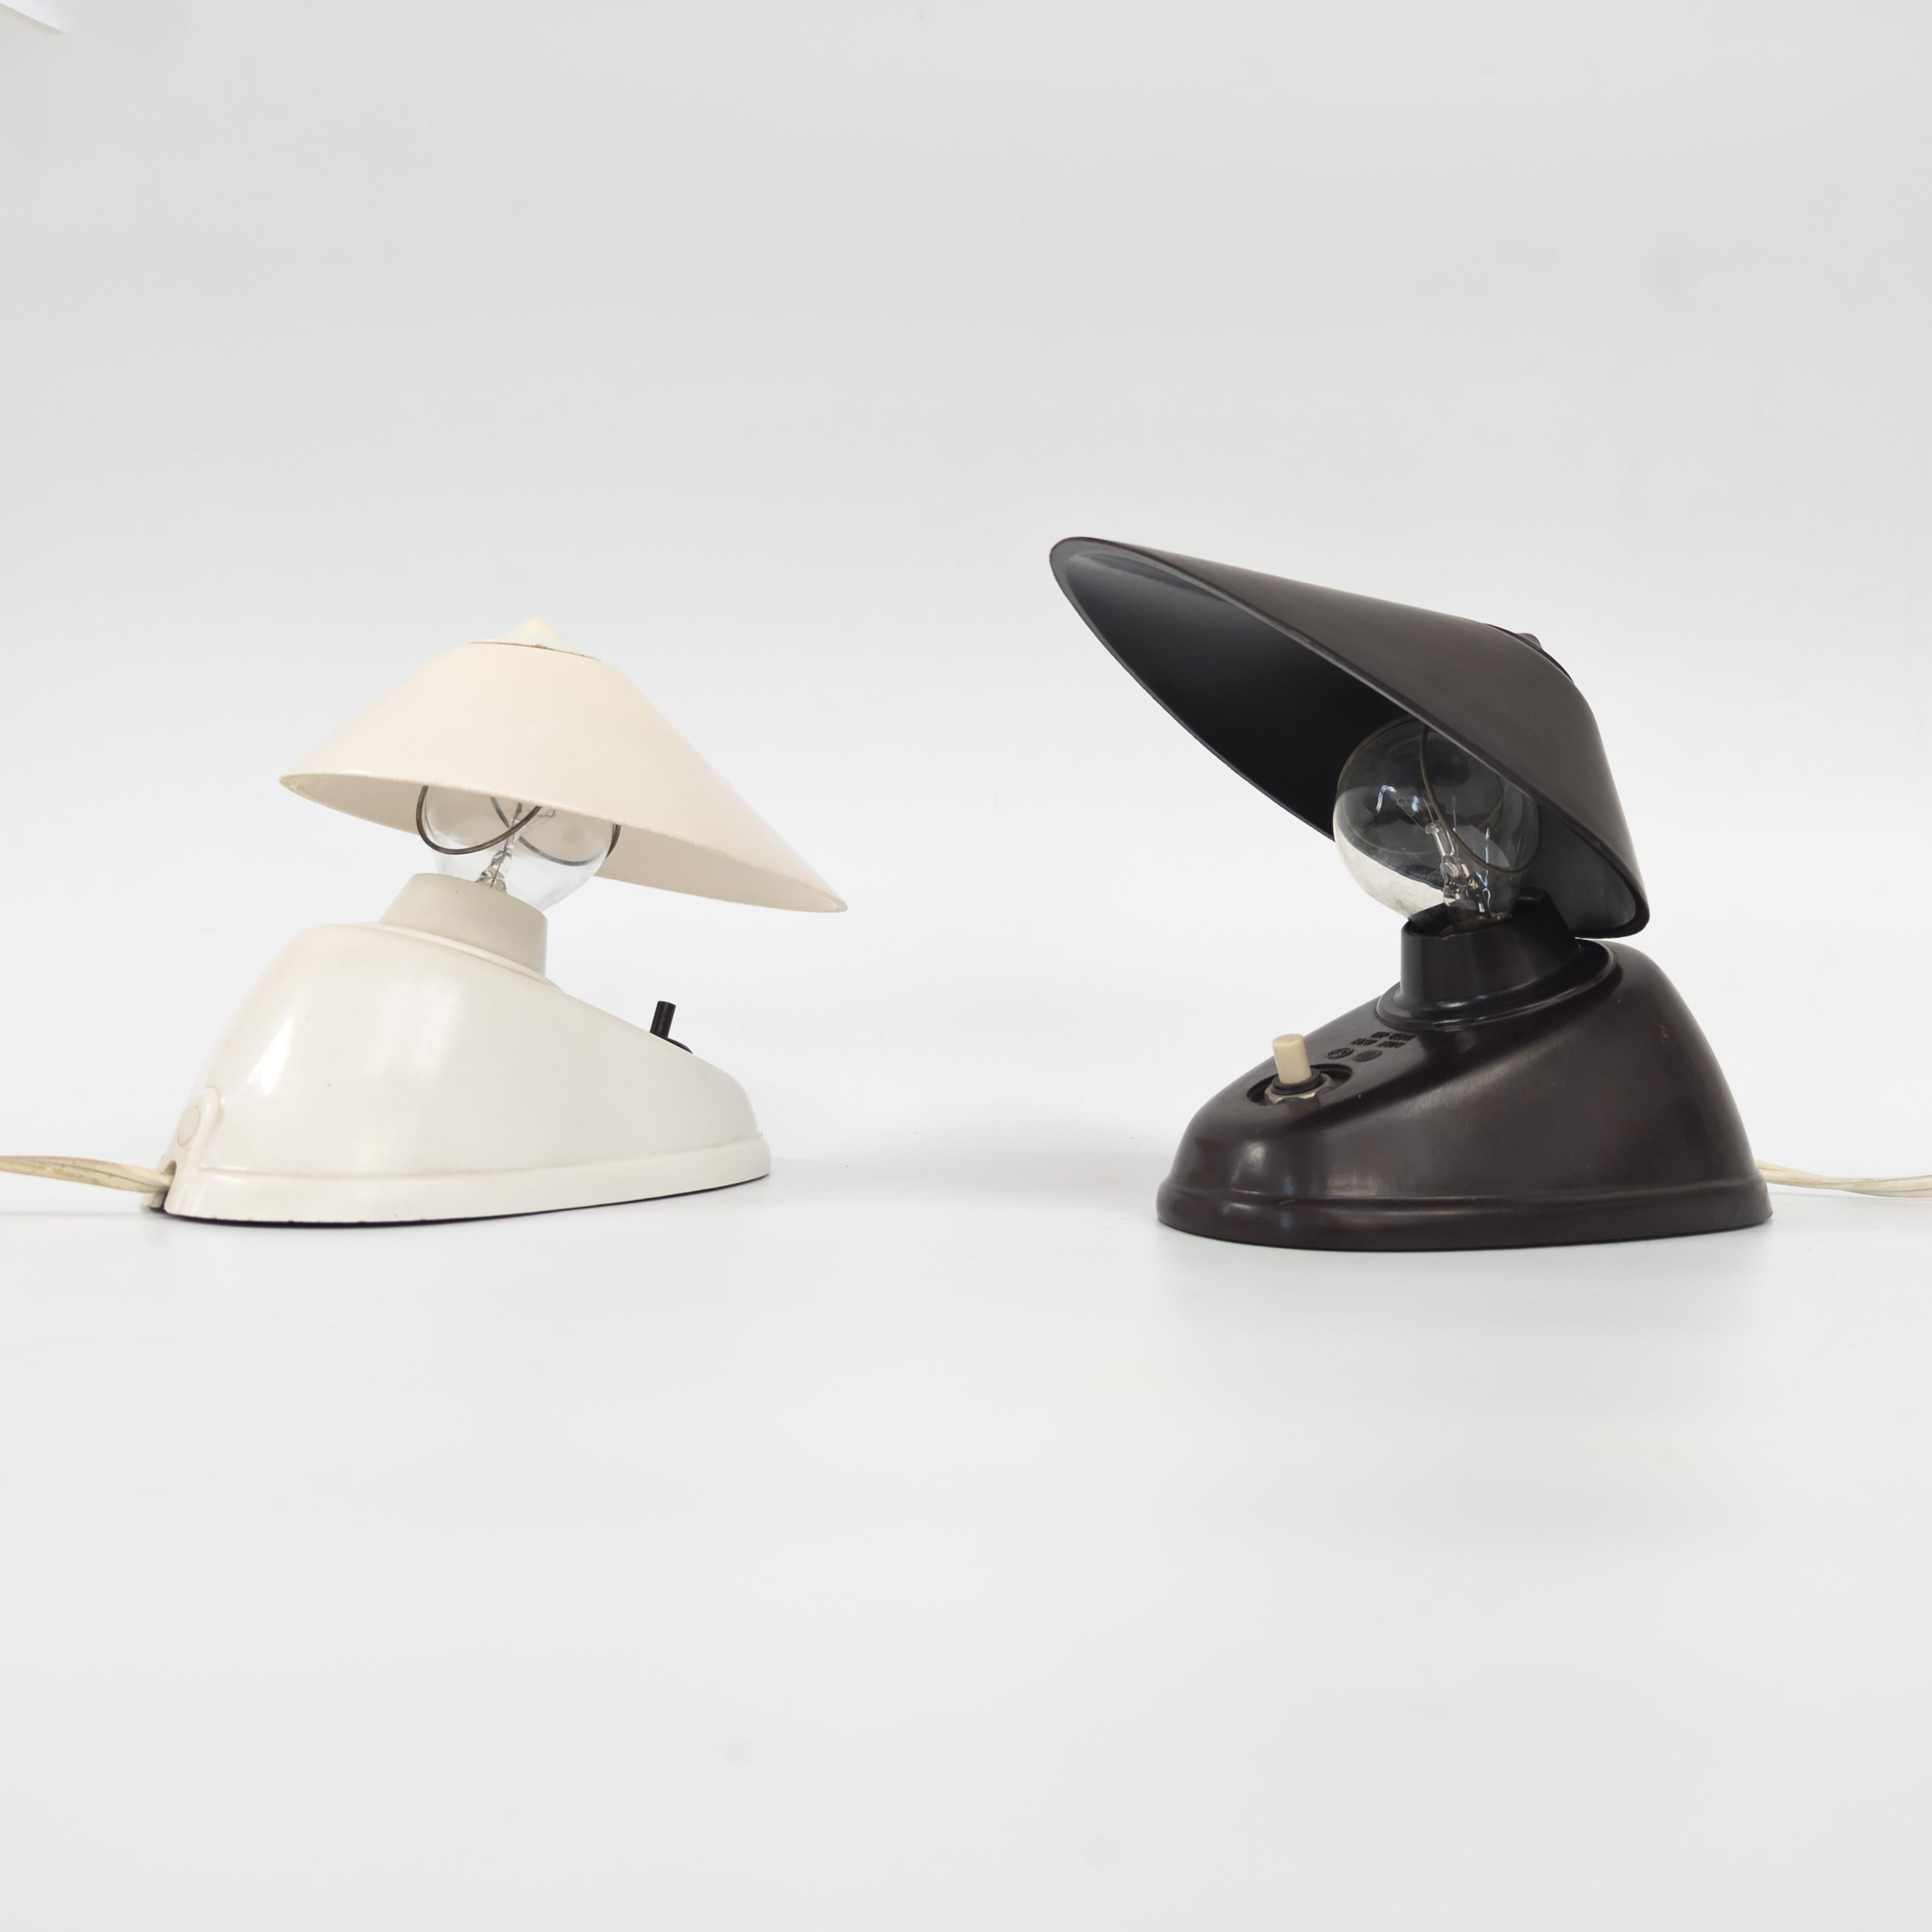 Manufactured by Elektrosvit Nové Zámky under catalogue number 11641. Former Czechoslovakia 1950s. Crafted from black and white bakelite, can be hung as a wall light or used as a desk lamp. Despite its strong pre-war modernist aesthetic, it's often